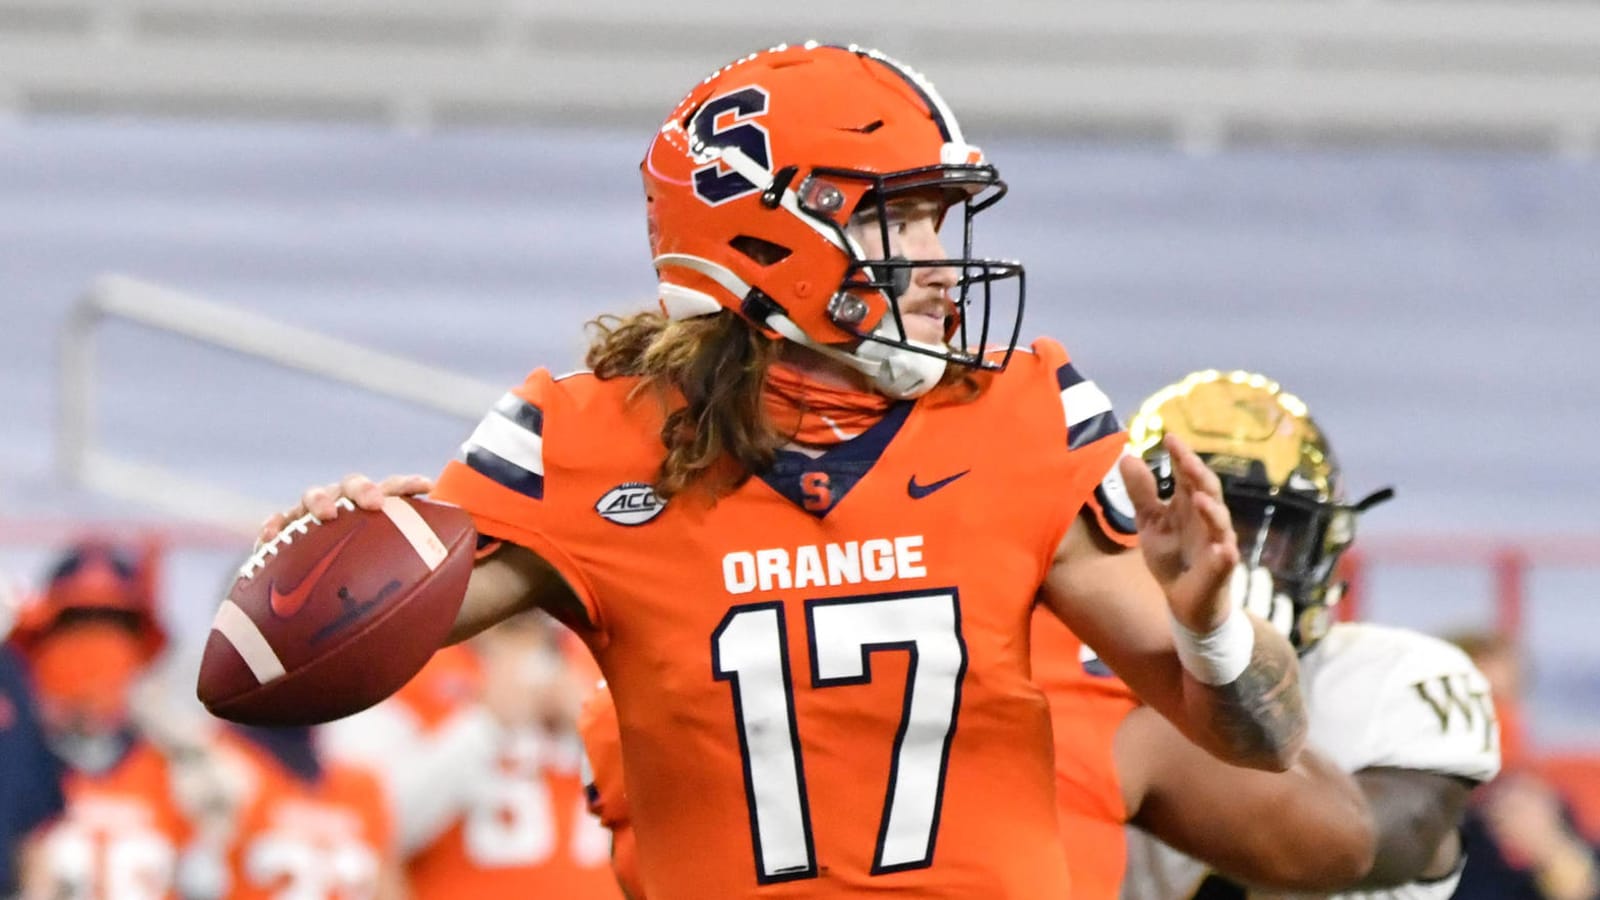 Syracuse QB had awful mental lapse on final play of loss